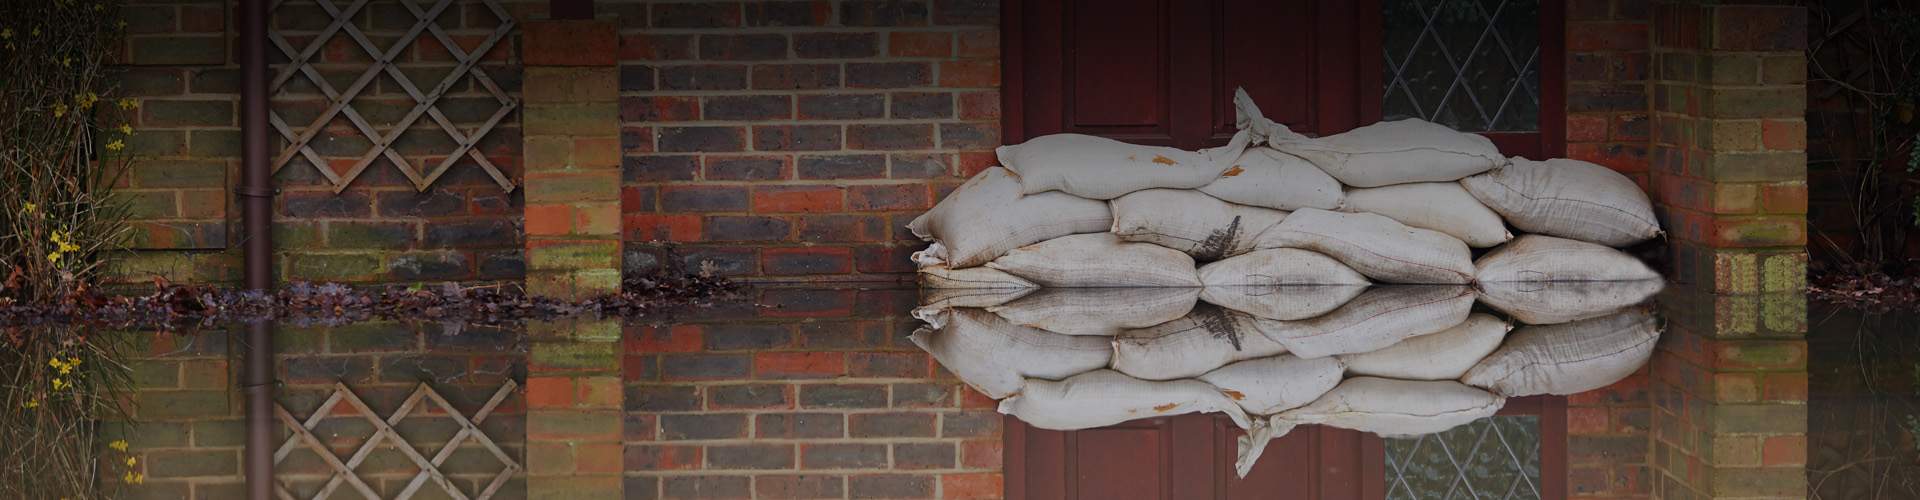 Photo of sandbags and flooding outside of a building